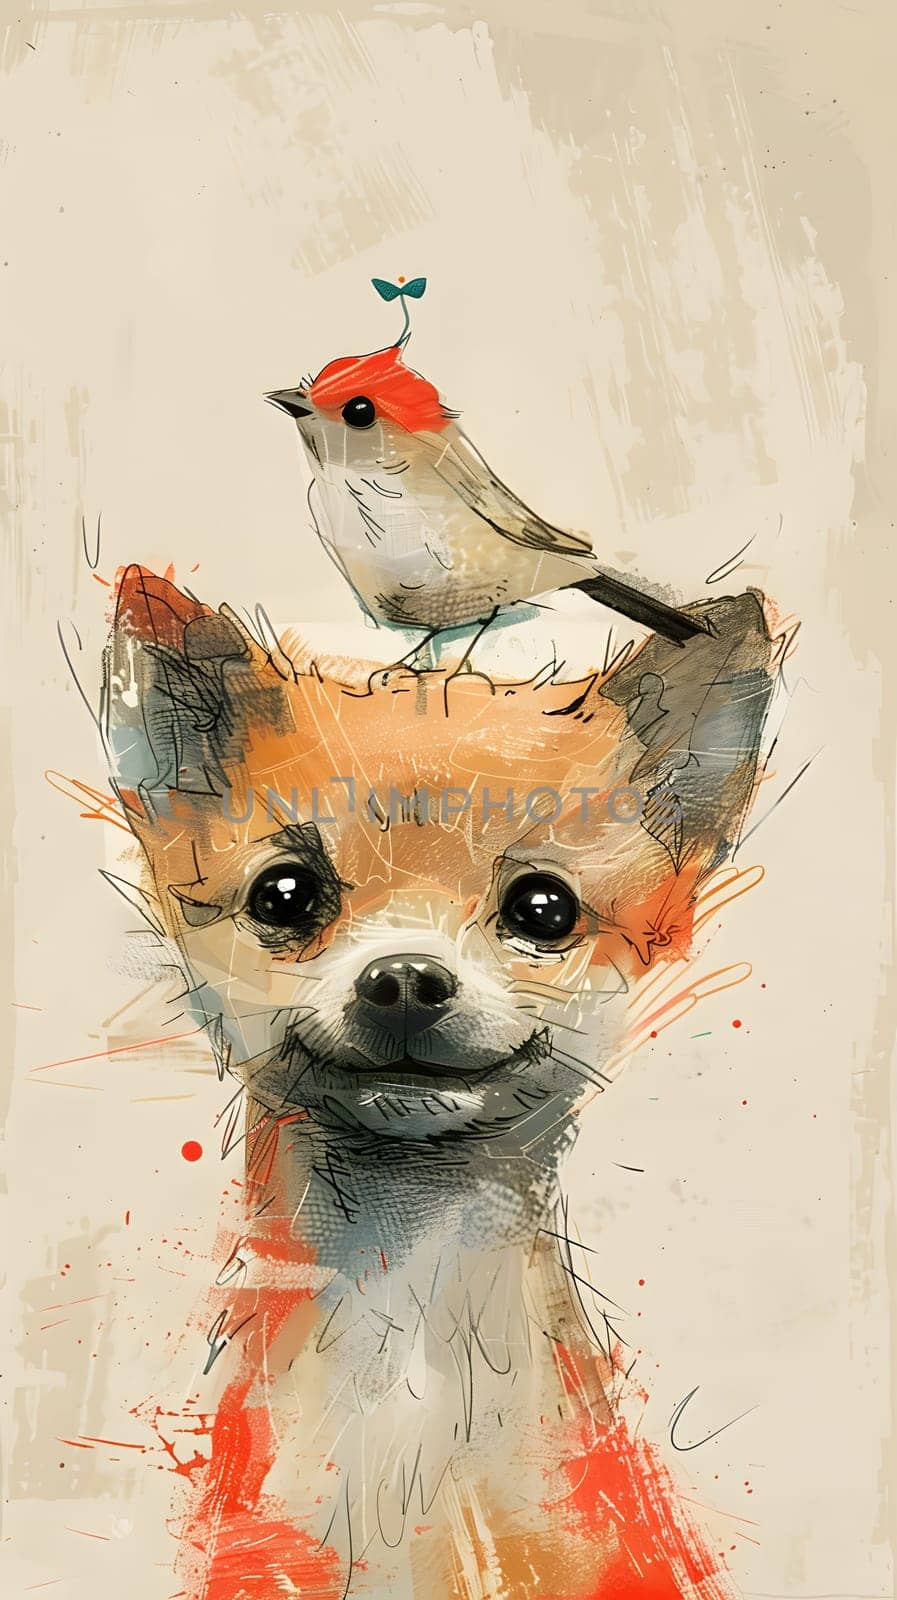 An illustration of a fawncolored dog with a bird perched on its head by Nadtochiy